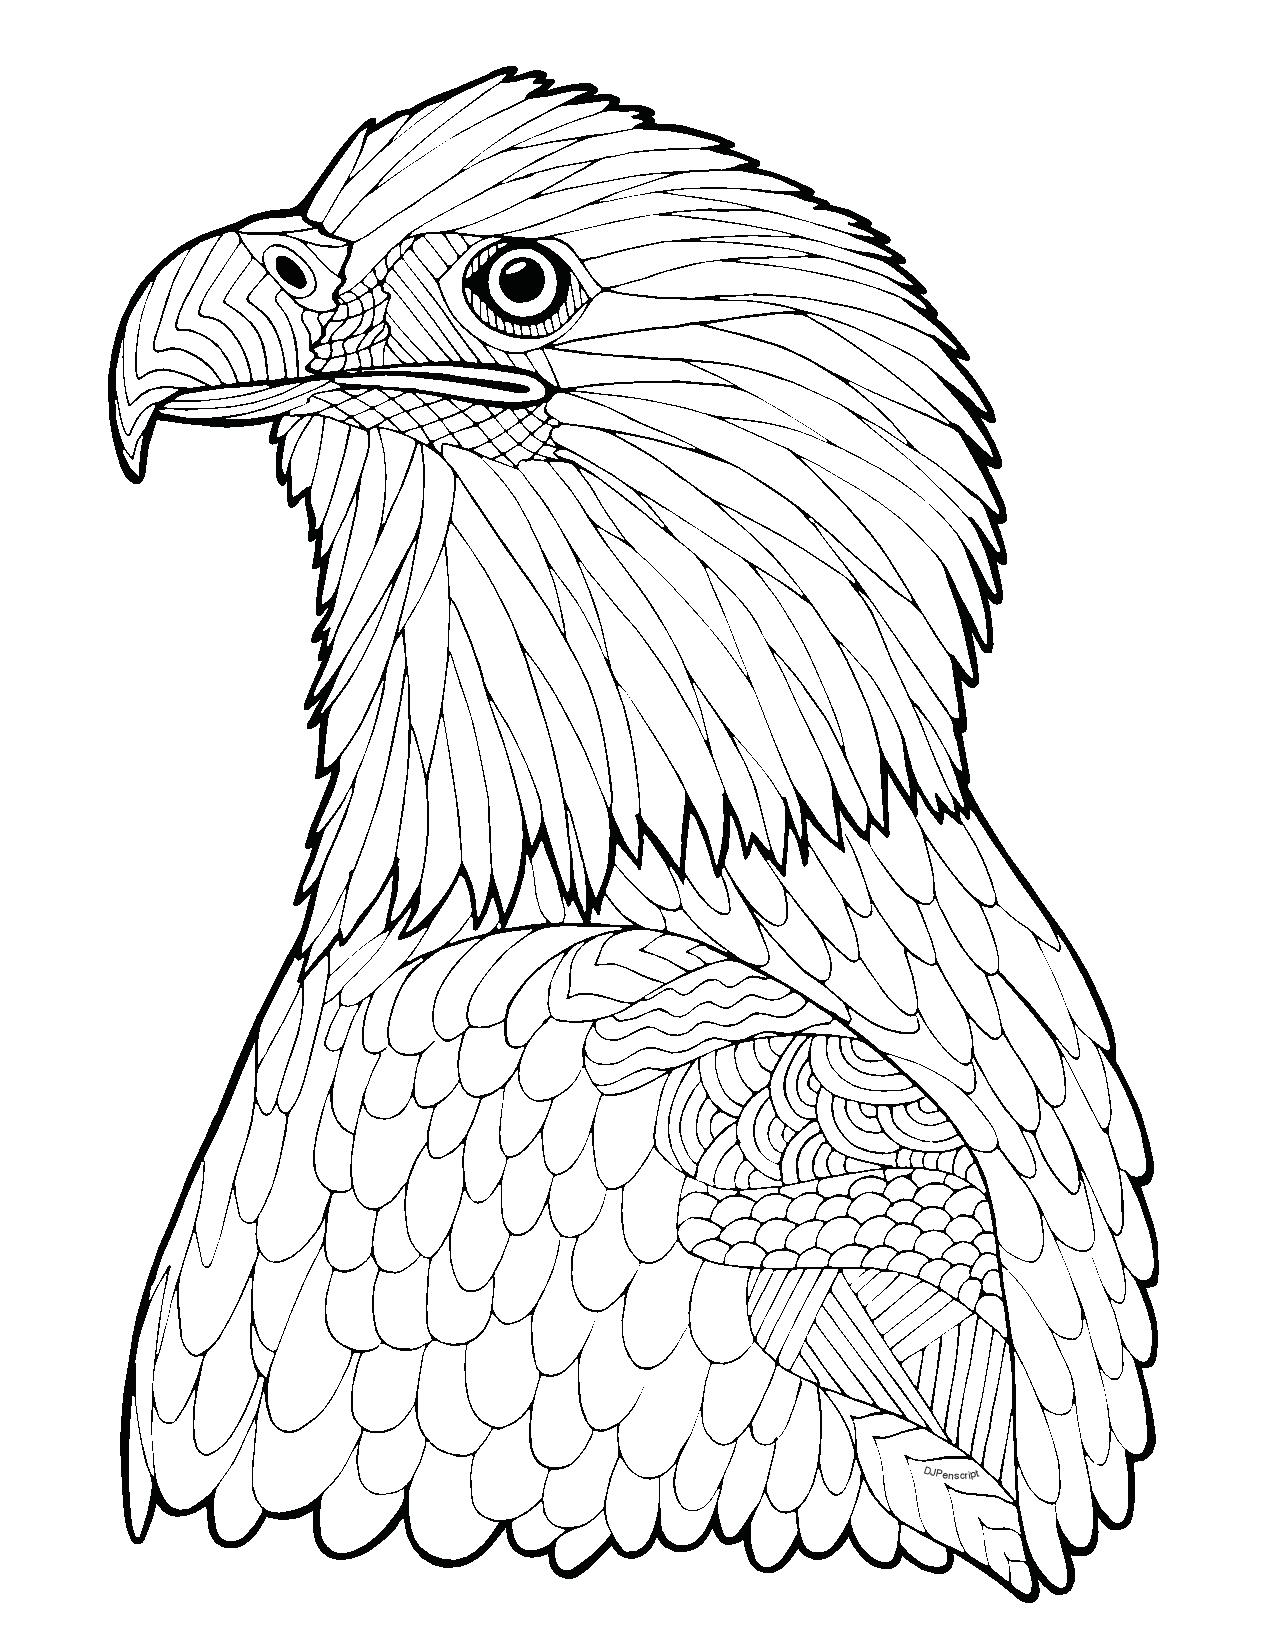 Bald Eagle Zentangle Page Adult Hard Advanced Coloring Page